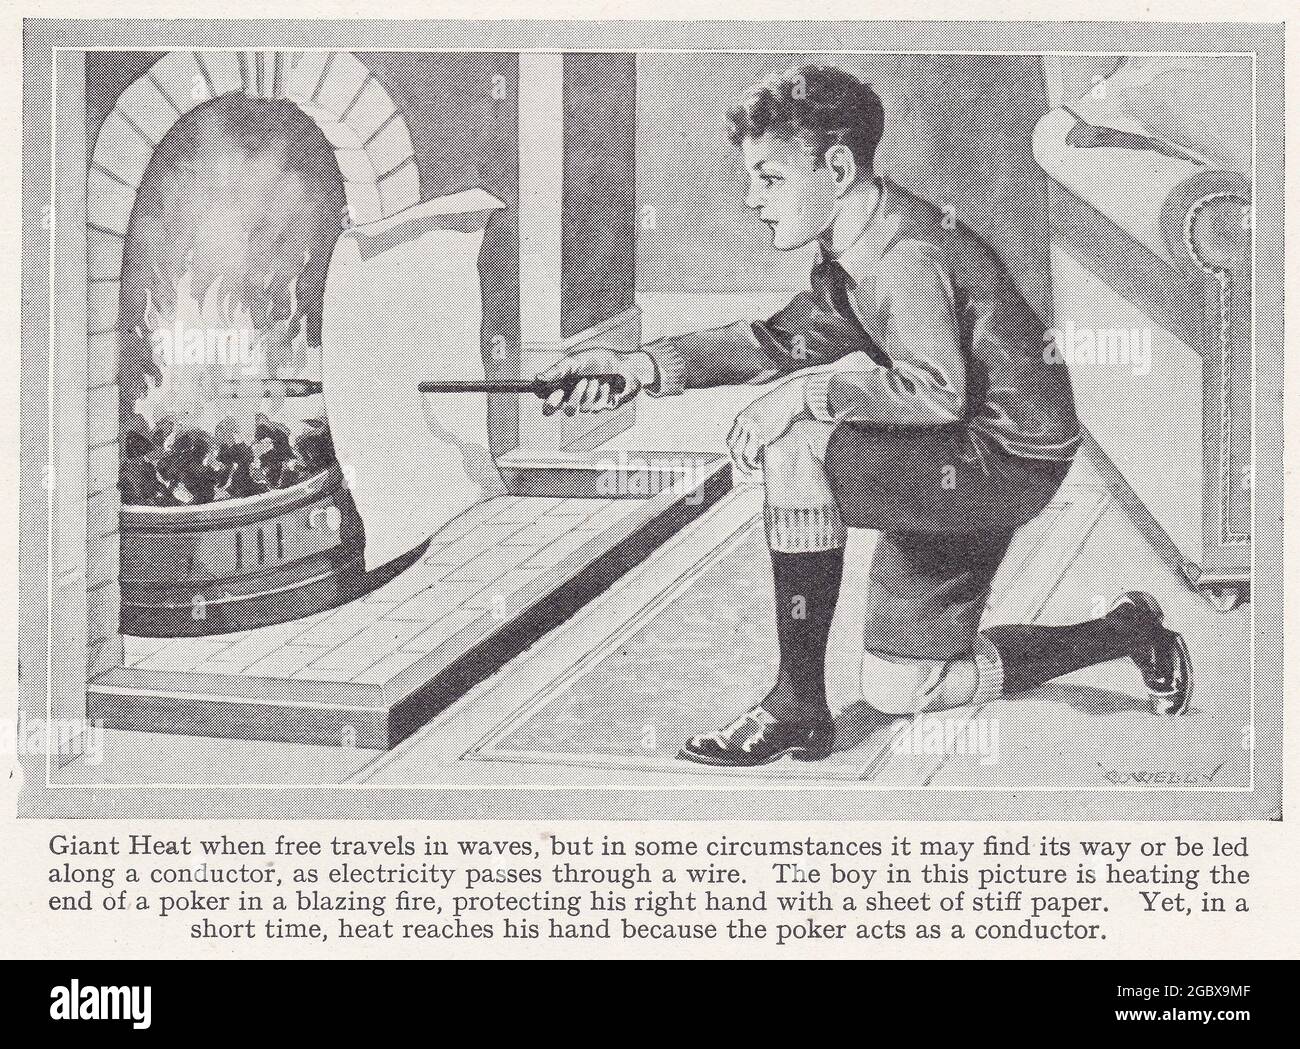 Vintage illustration of Giant Heat - Boy holding a poker in an open fire protecting his hand from the heat with a sheet of stiff paper 1940s. Stock Photo